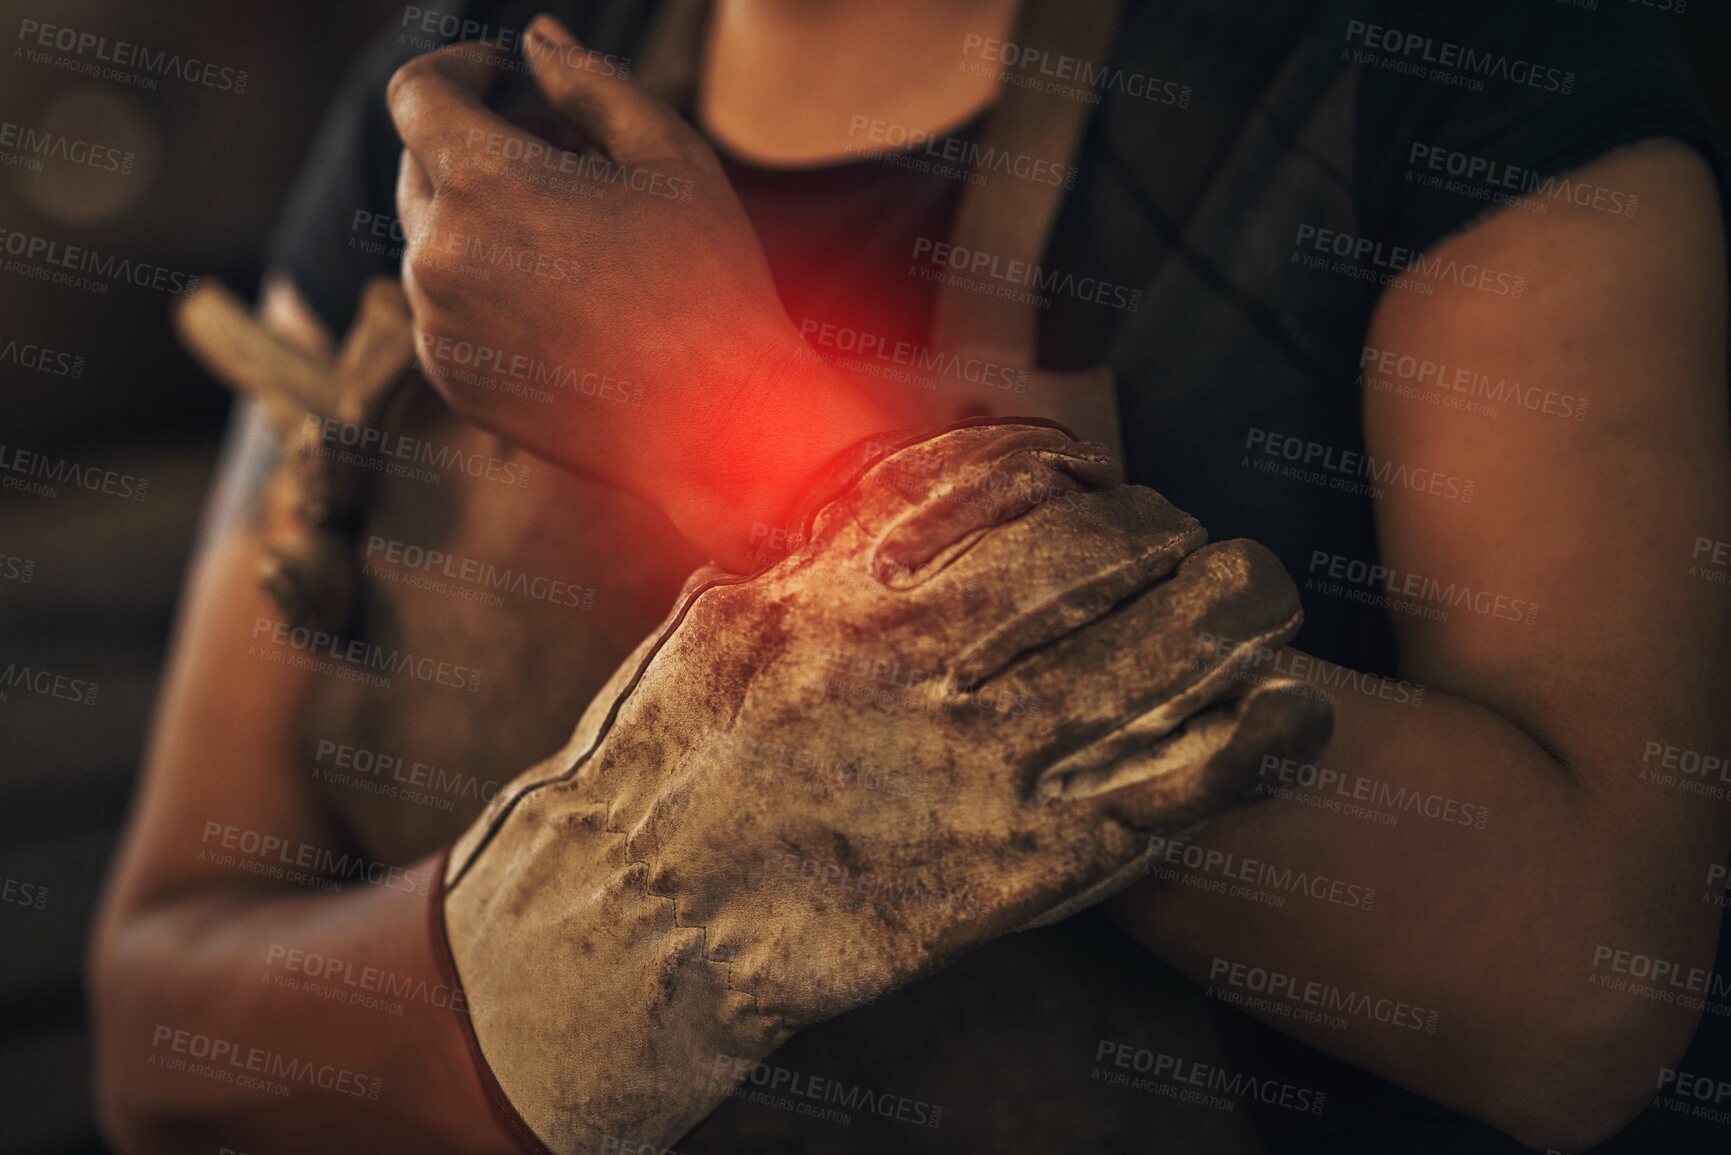 Buy stock photo Inflammation, holding and woman with wrist pain at work, medical accident and healthcare emergency. Risk, injured and person with an arm injury, wound and trauma from a fracture or broken bone